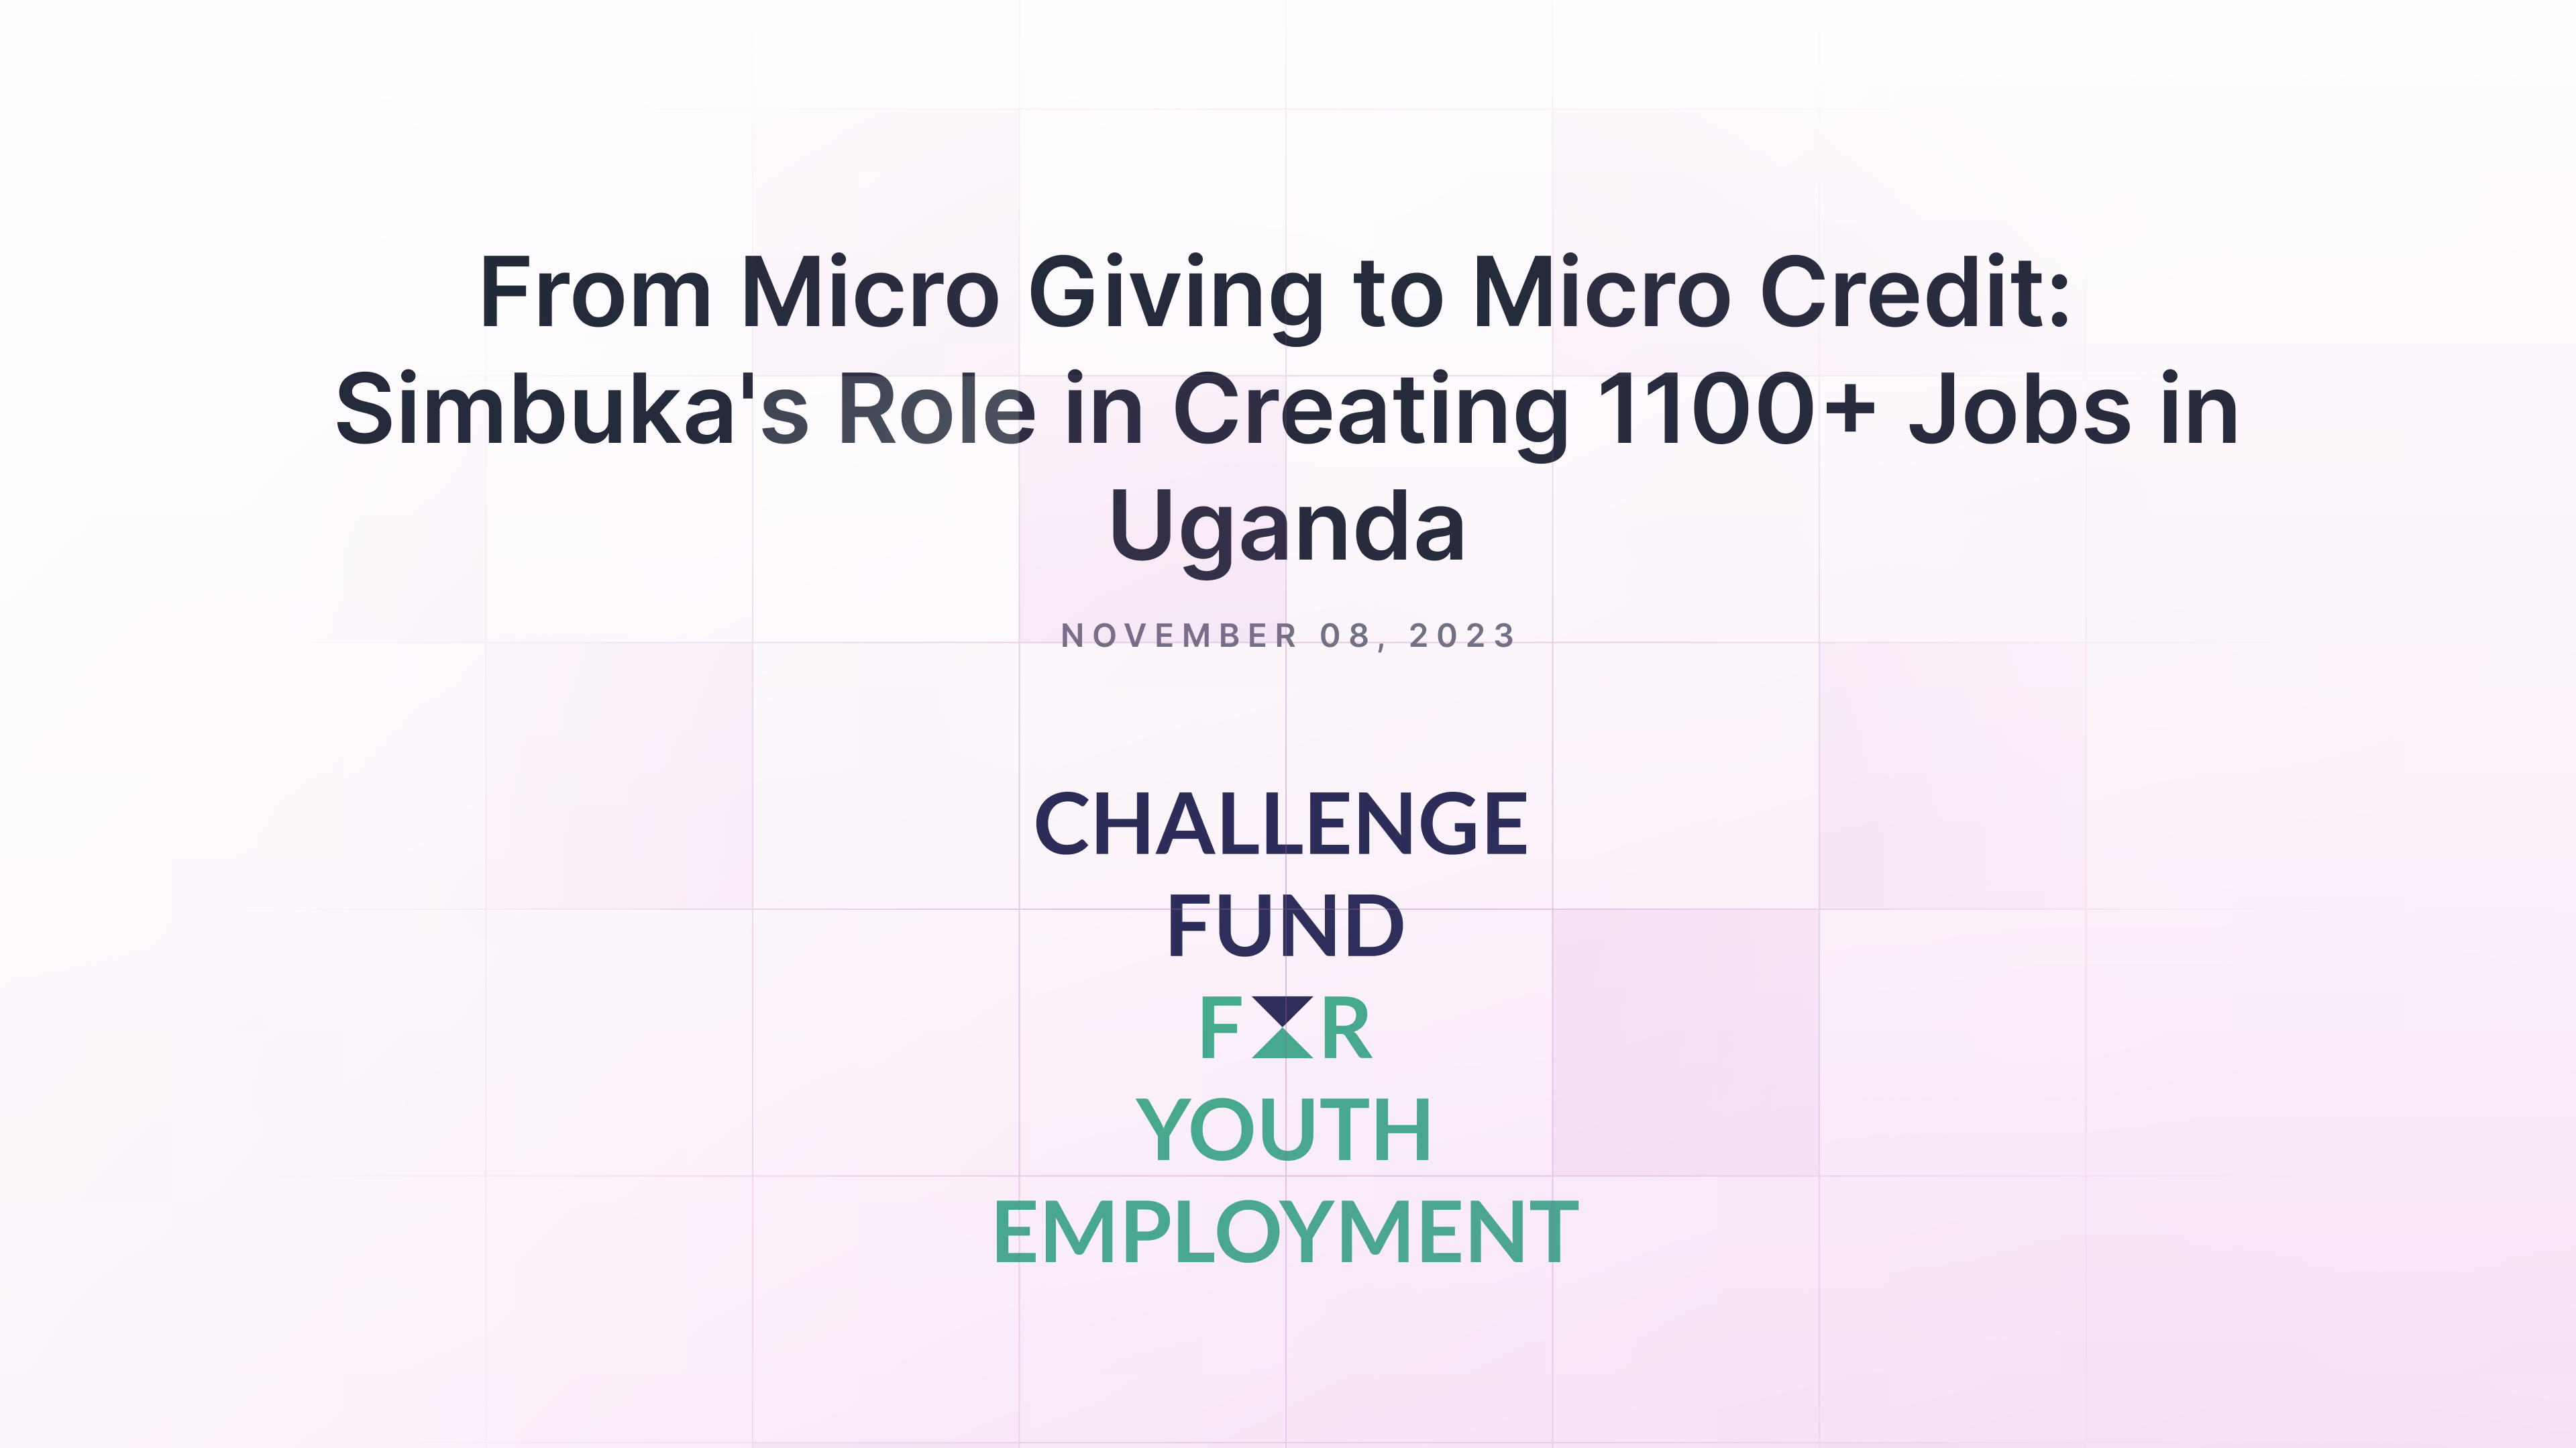 From Micro Giving to Micro Credit: Simbuka's Role in Creating 1100+ Jobs in Uganda